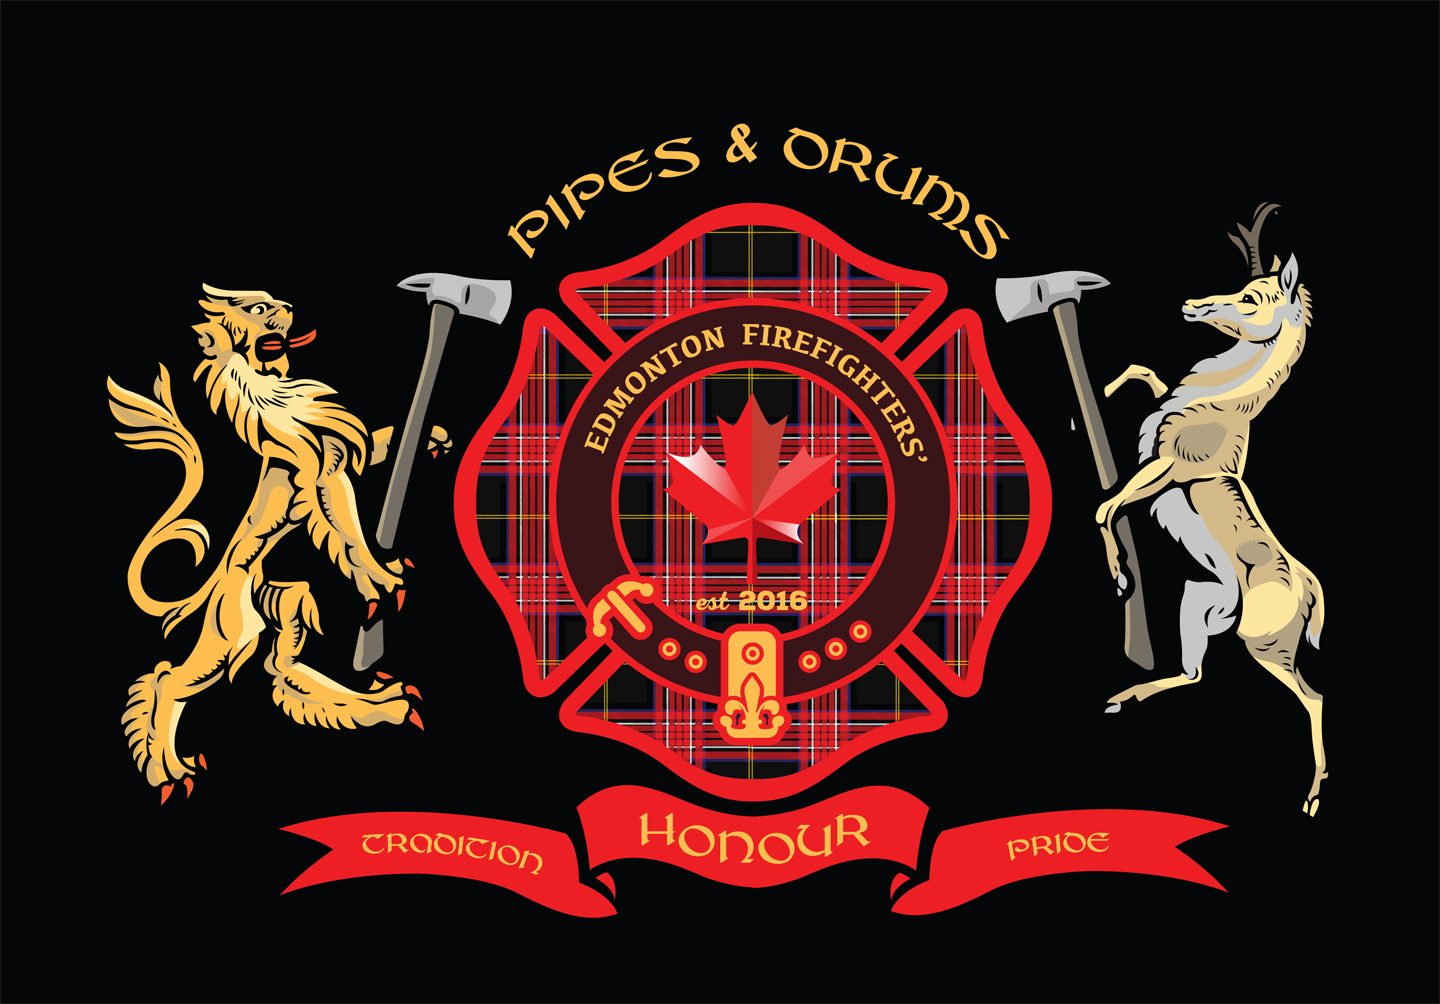 The Edmonton Firefighters Pipes & Drums appoint a Drum major and Pipe major